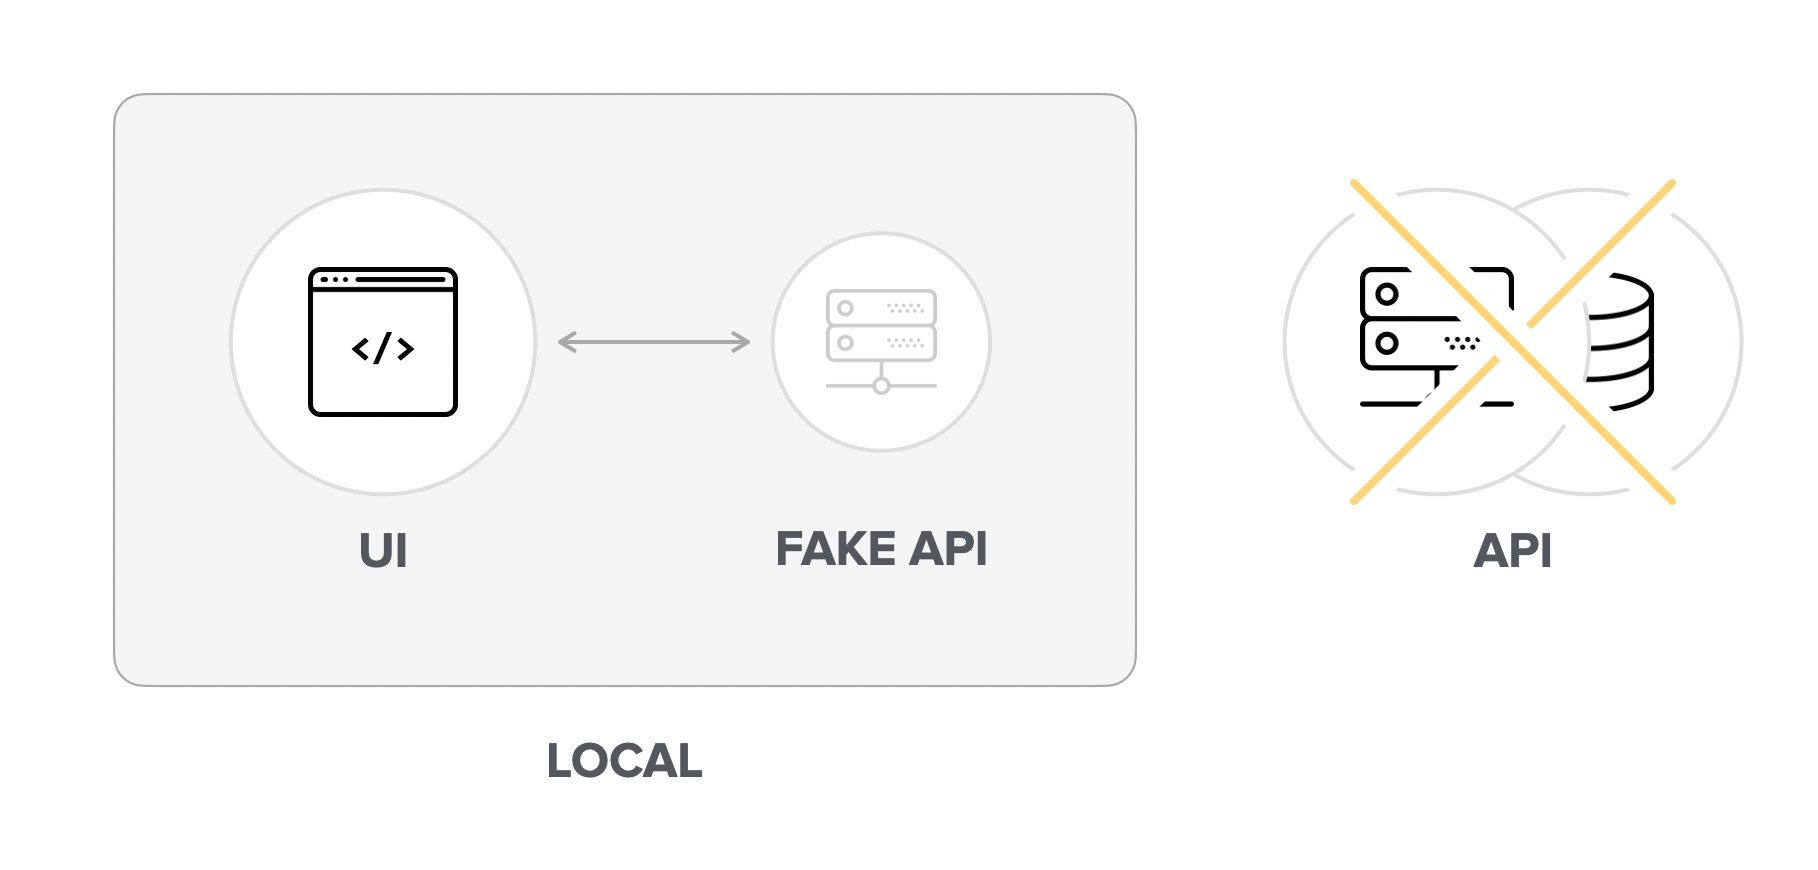 A User Interface connected to a local Fake API